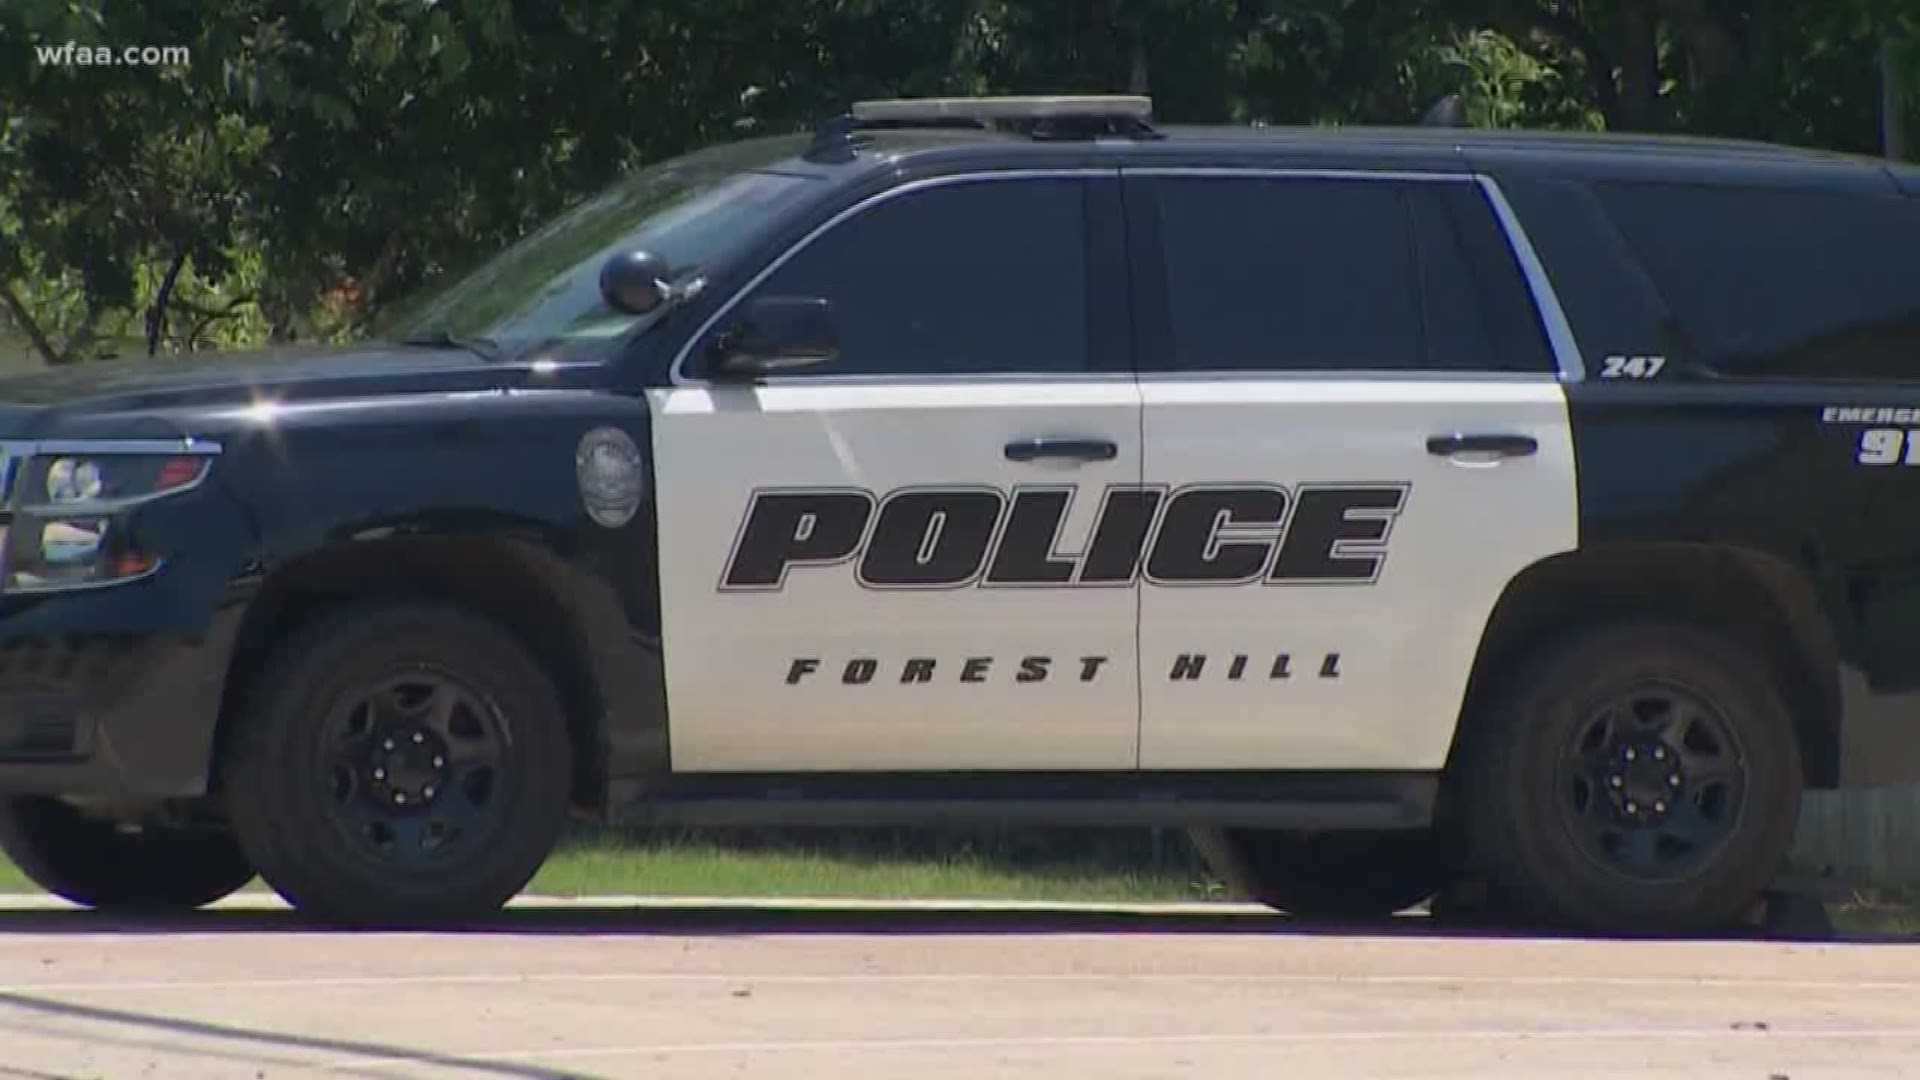 The Forest Hill chief said the officer wasn't fired for not finding the child. He was fired for his behavior when he responded to the hotel a second time.